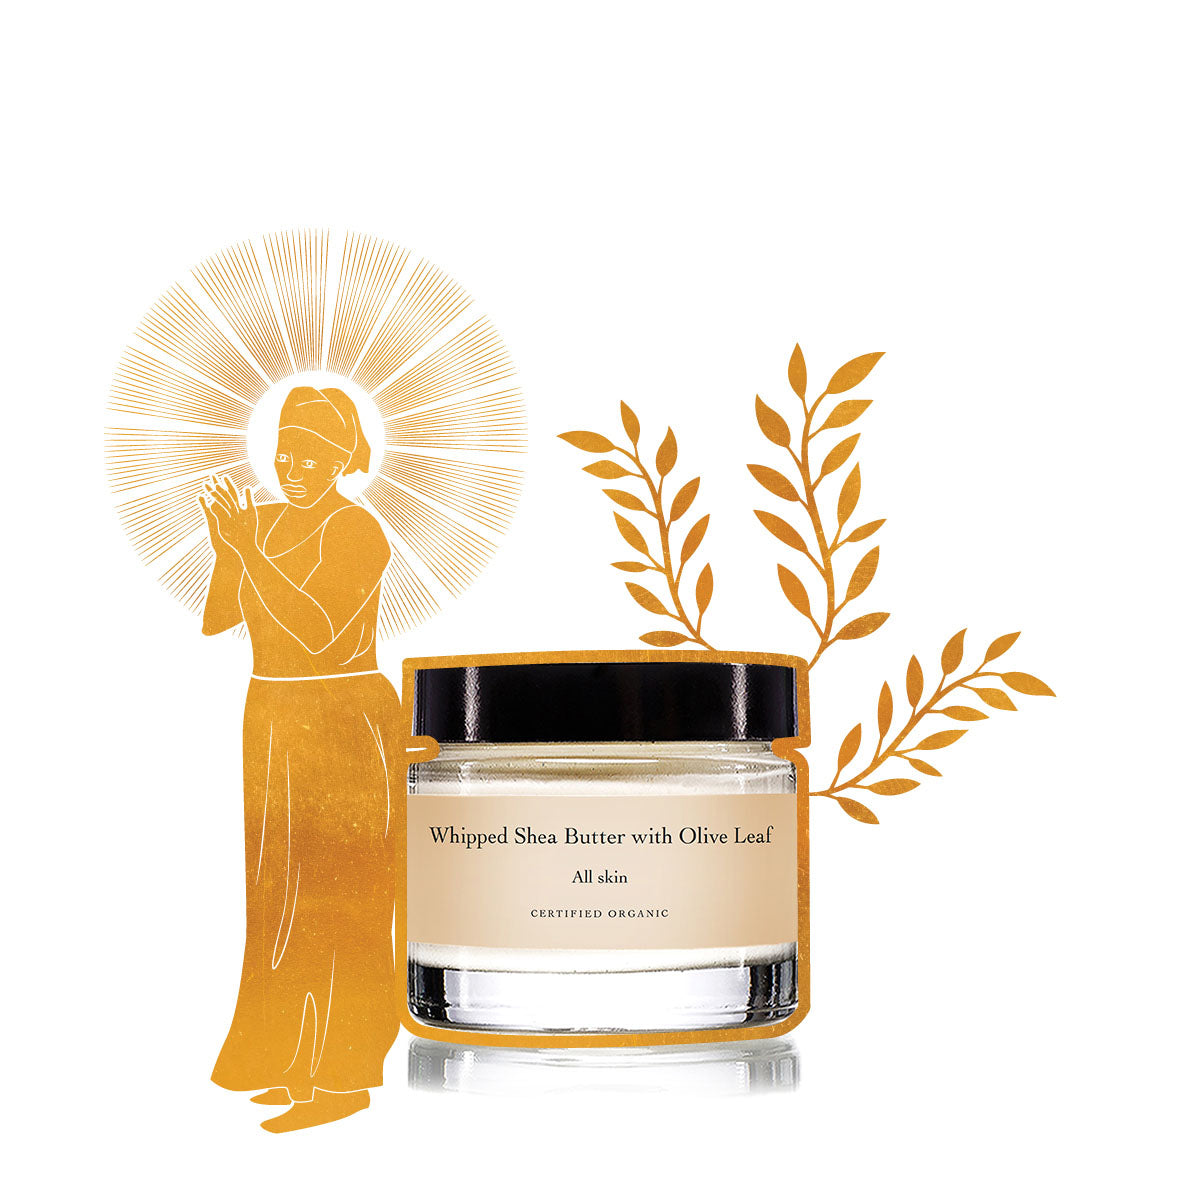 evanhealy organic whipped shea butter with olive leaf facial moisturizer for face and body gilded graphic